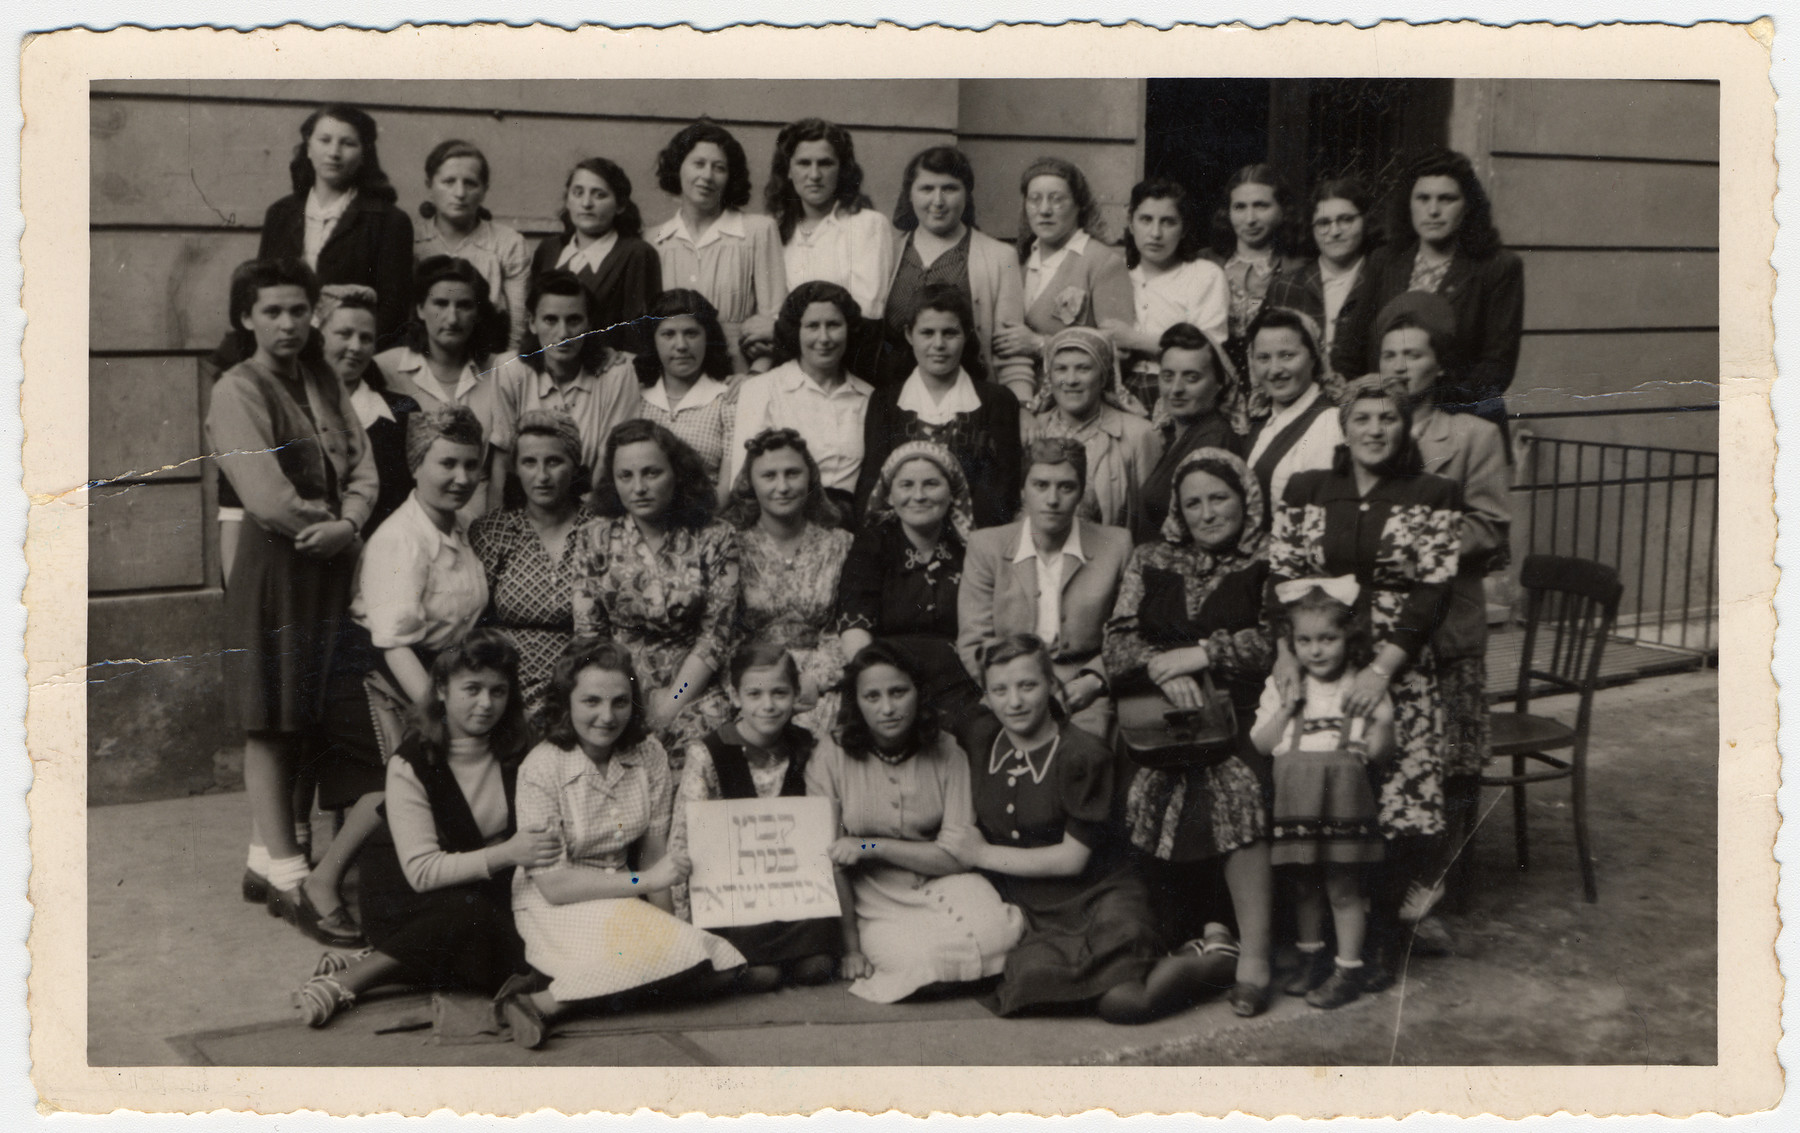 Group portrait of young religious women from Kibbutz Bnot Agudat Yisrael in the Bad Gastein displaced persons' camp.

Among those pictured are Chana Chamanovitch (first row, second from the left), Esther Ass (first row fourth from the left) and Itka Ass (second row, third from the left).